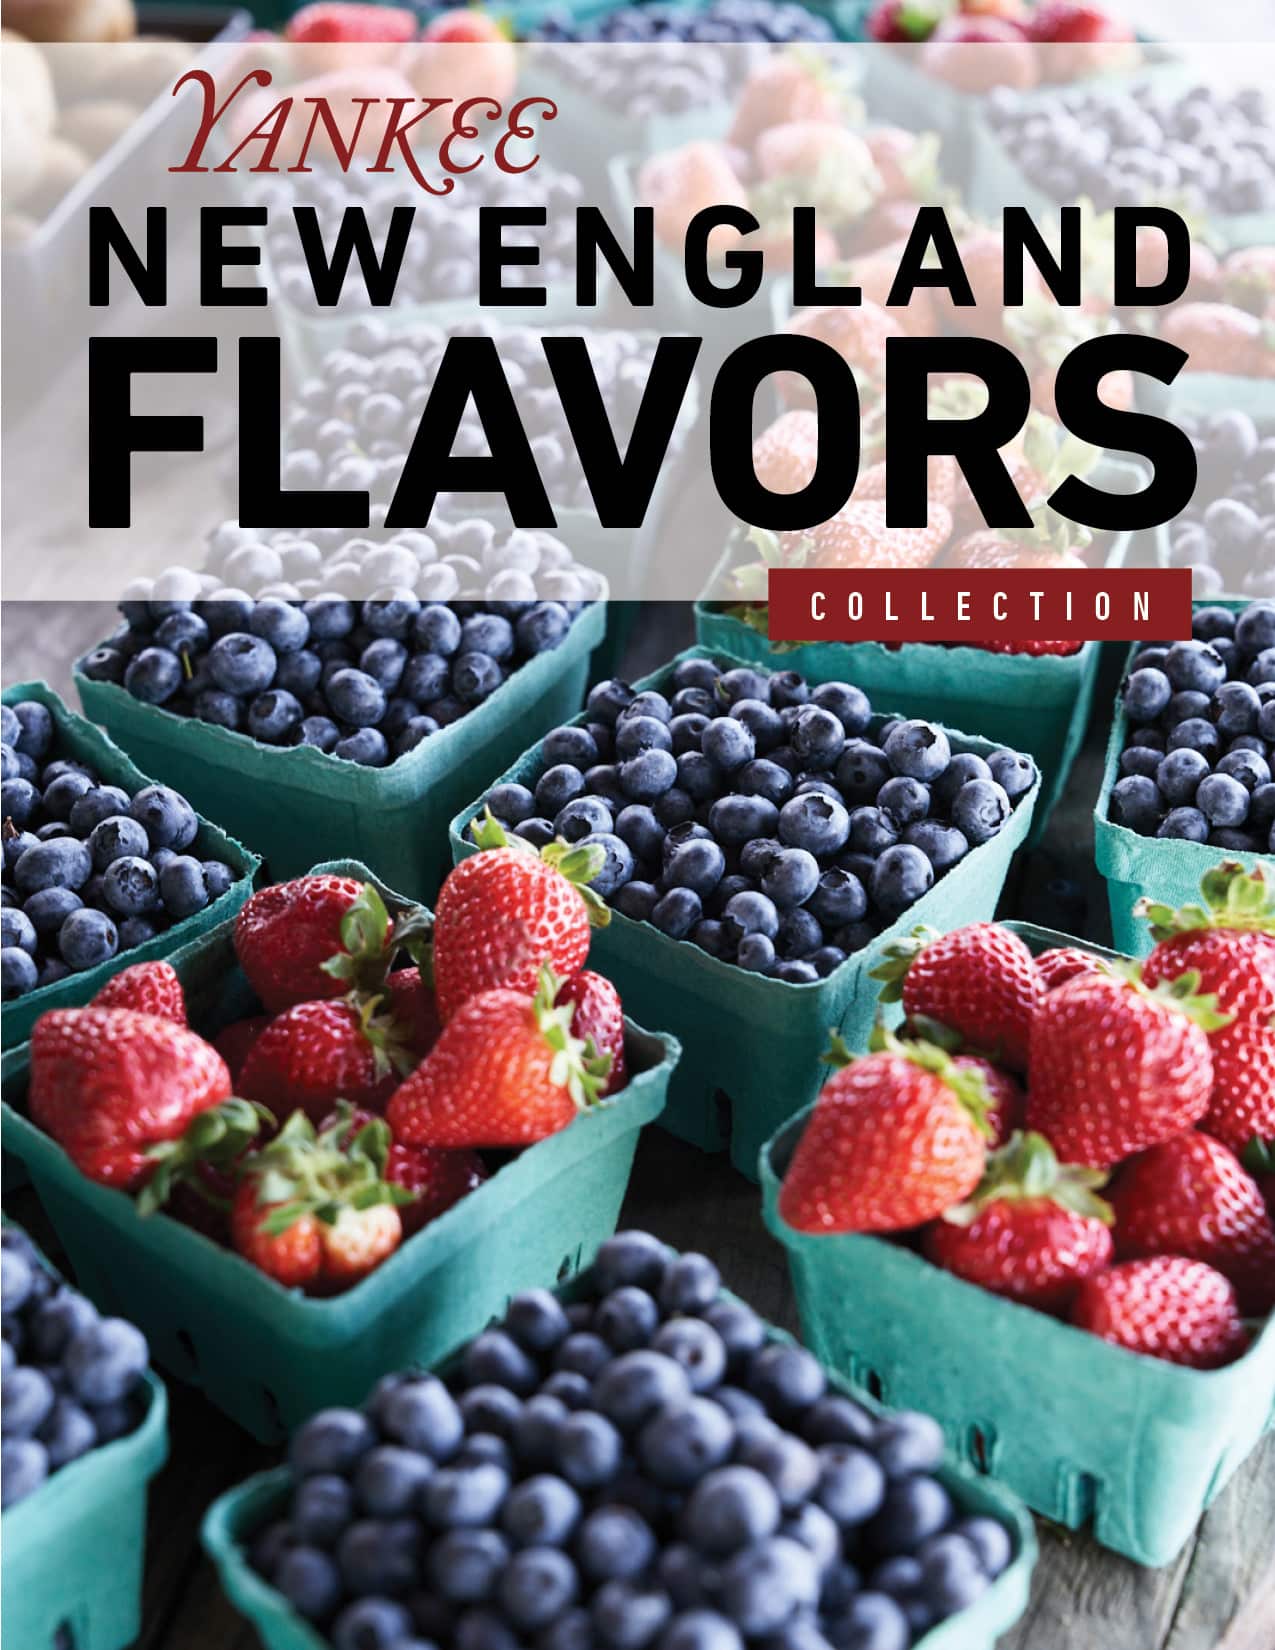 yankee-special-collection-new-england-flavors-summer